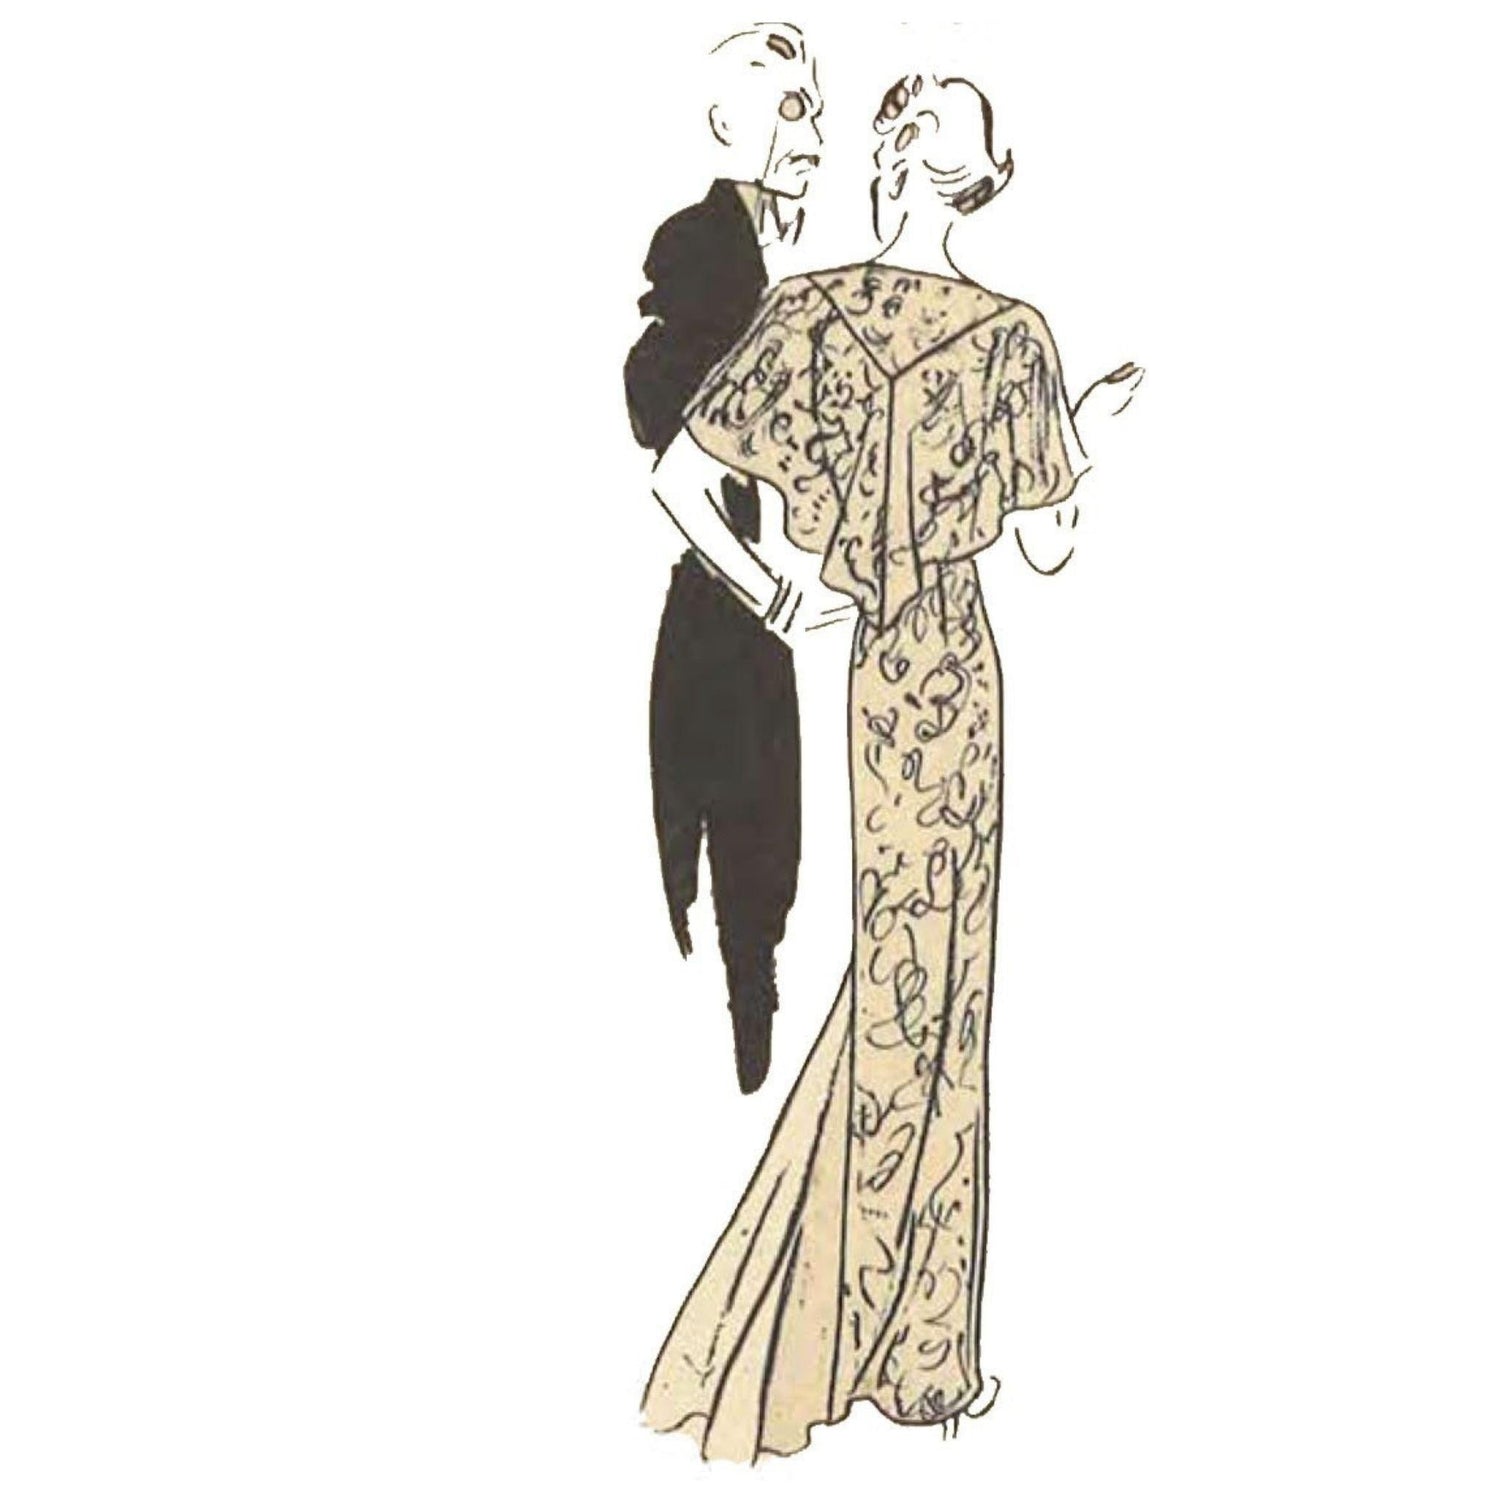 Lady wearing evening gown